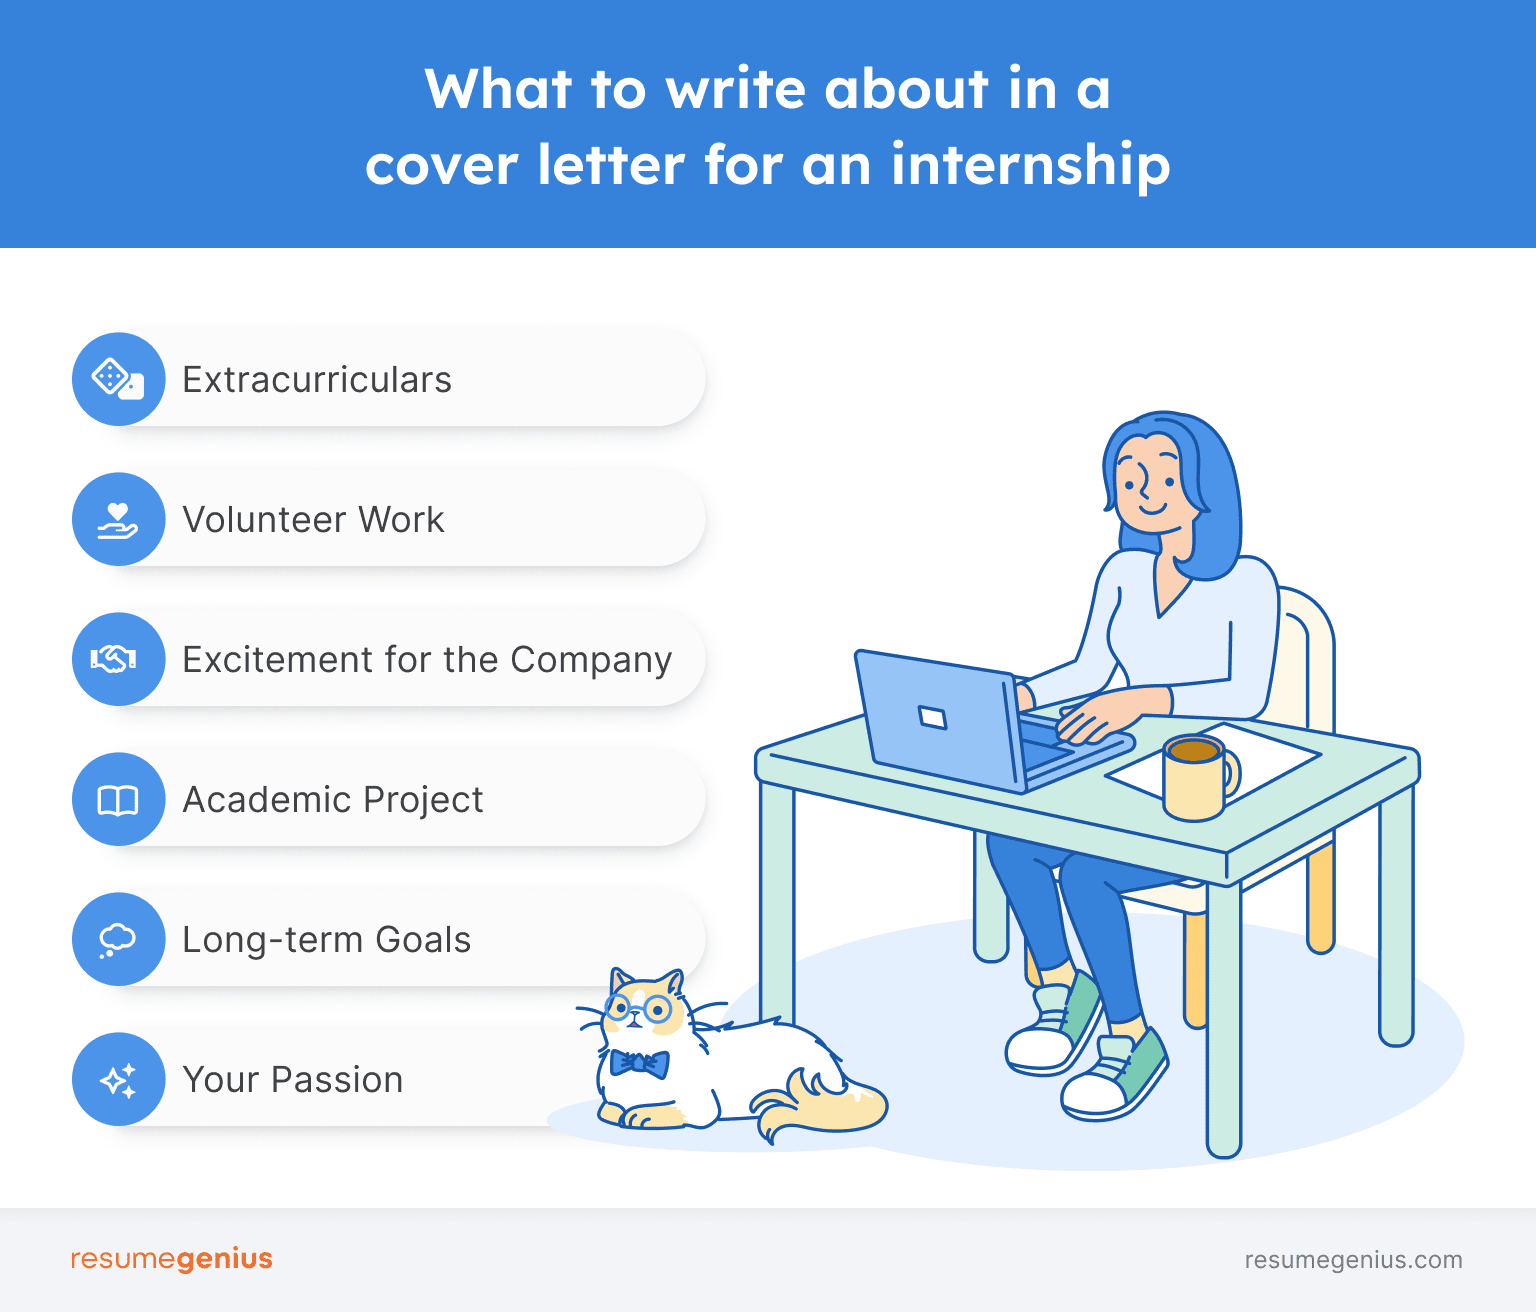 A graphic showing what to include in an internship cover letter: extracurriculars, volunteer work, excitement for the company, academic project, long-term goals, your passion. 